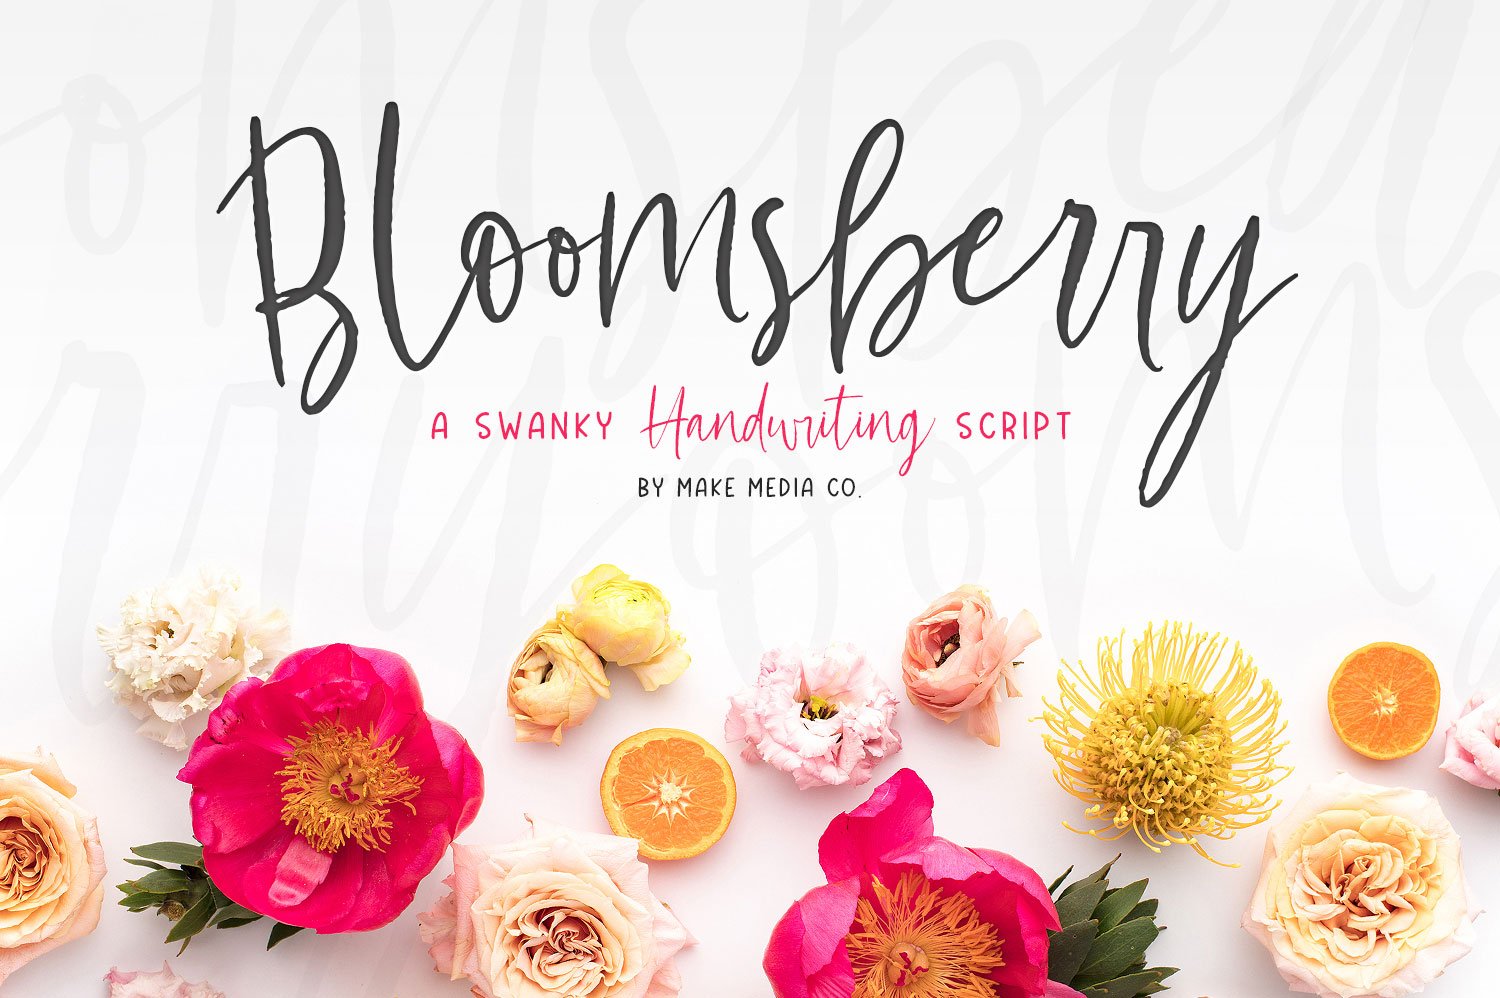 Bloomsberry Type & Graphics